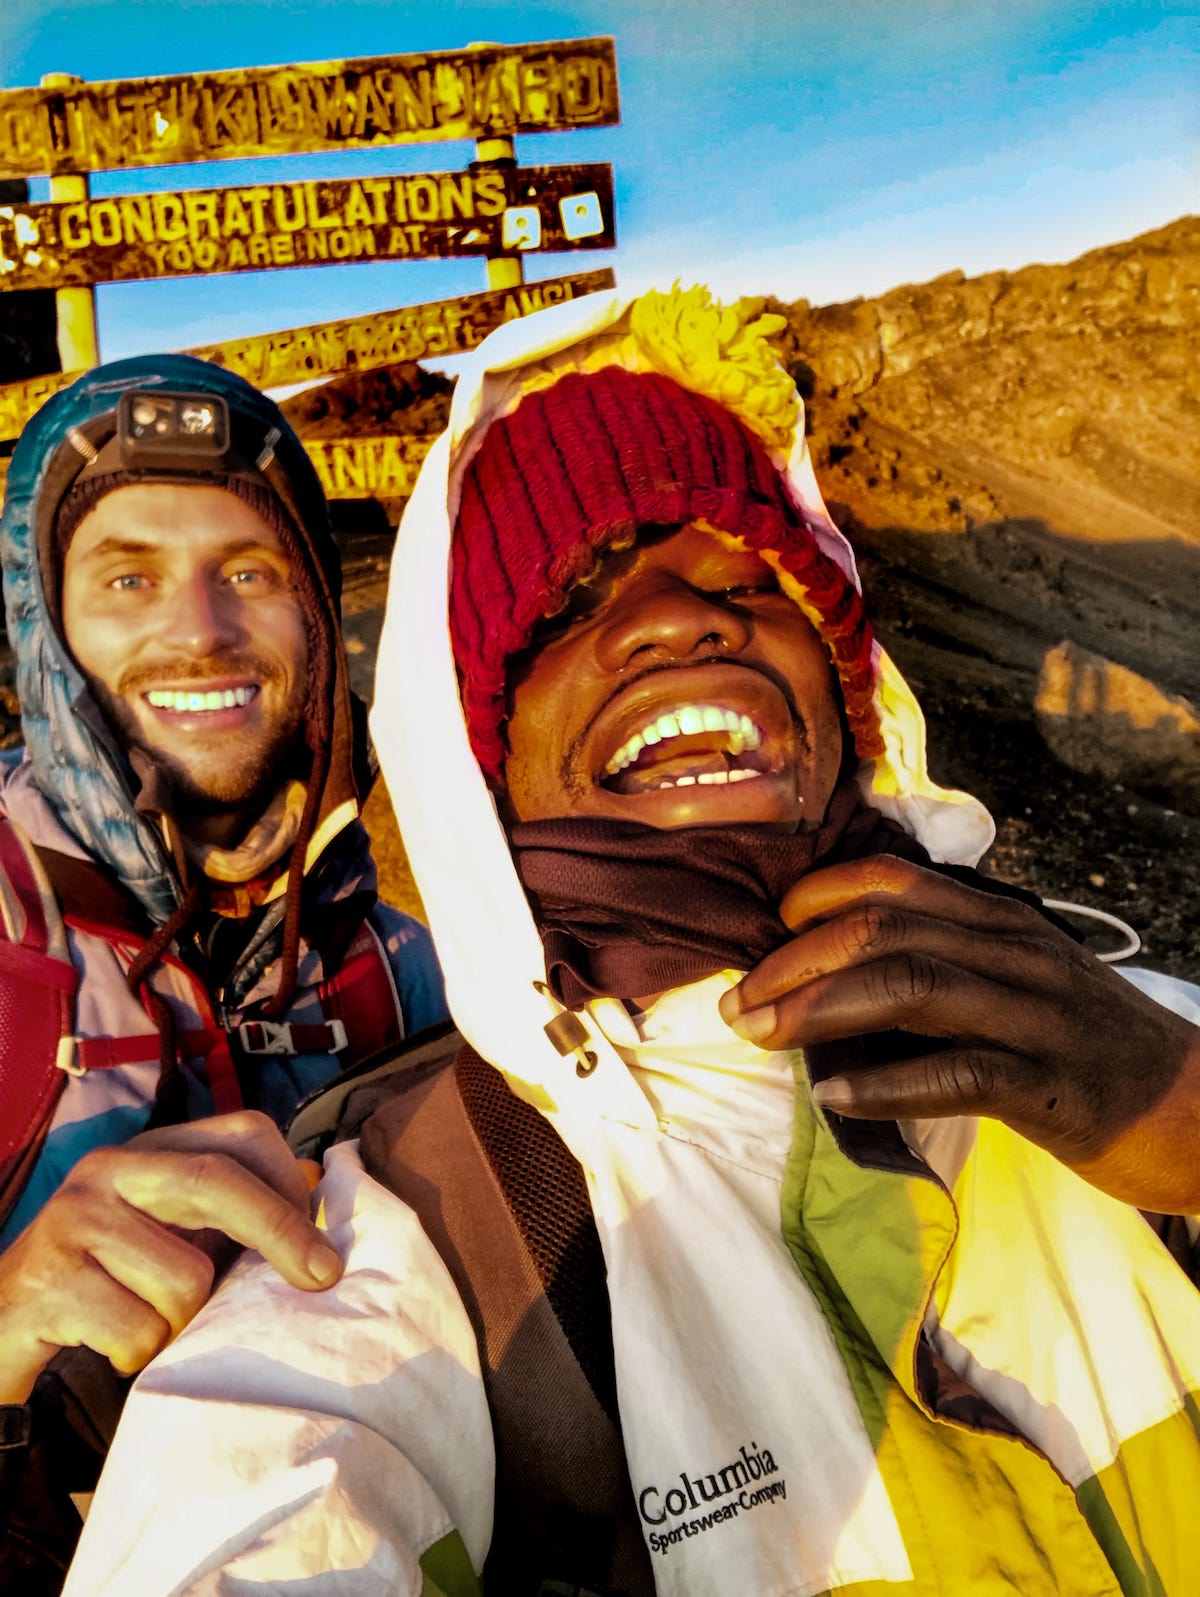 Two men smile with mountain gear on.